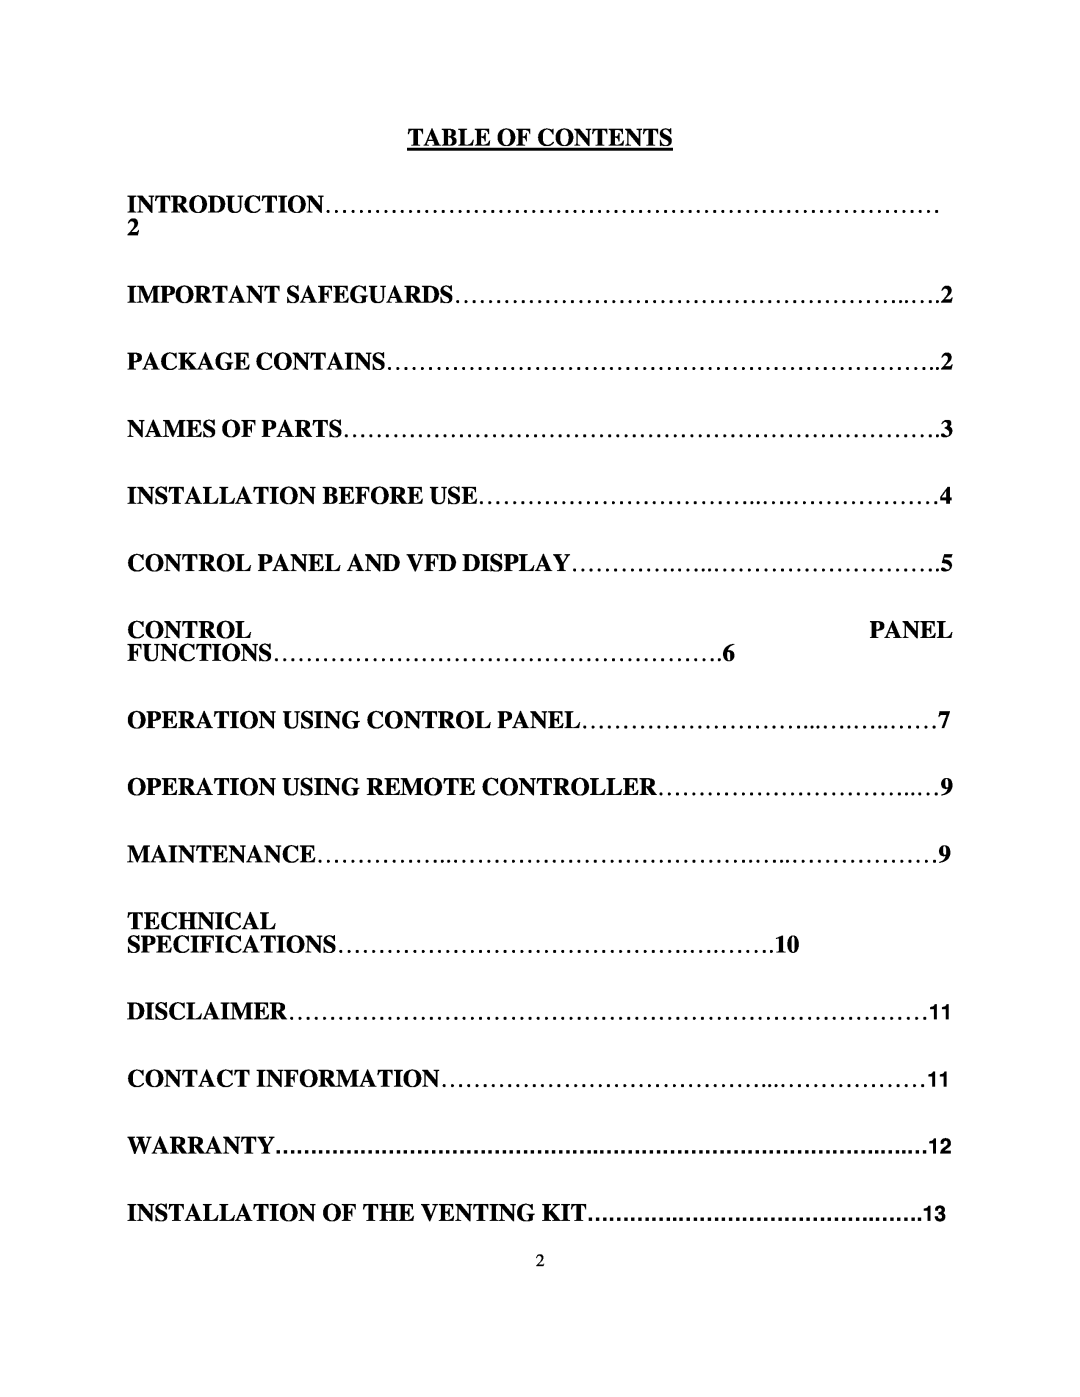 Soleus Air LX-100 owner manual Table Of Contents 